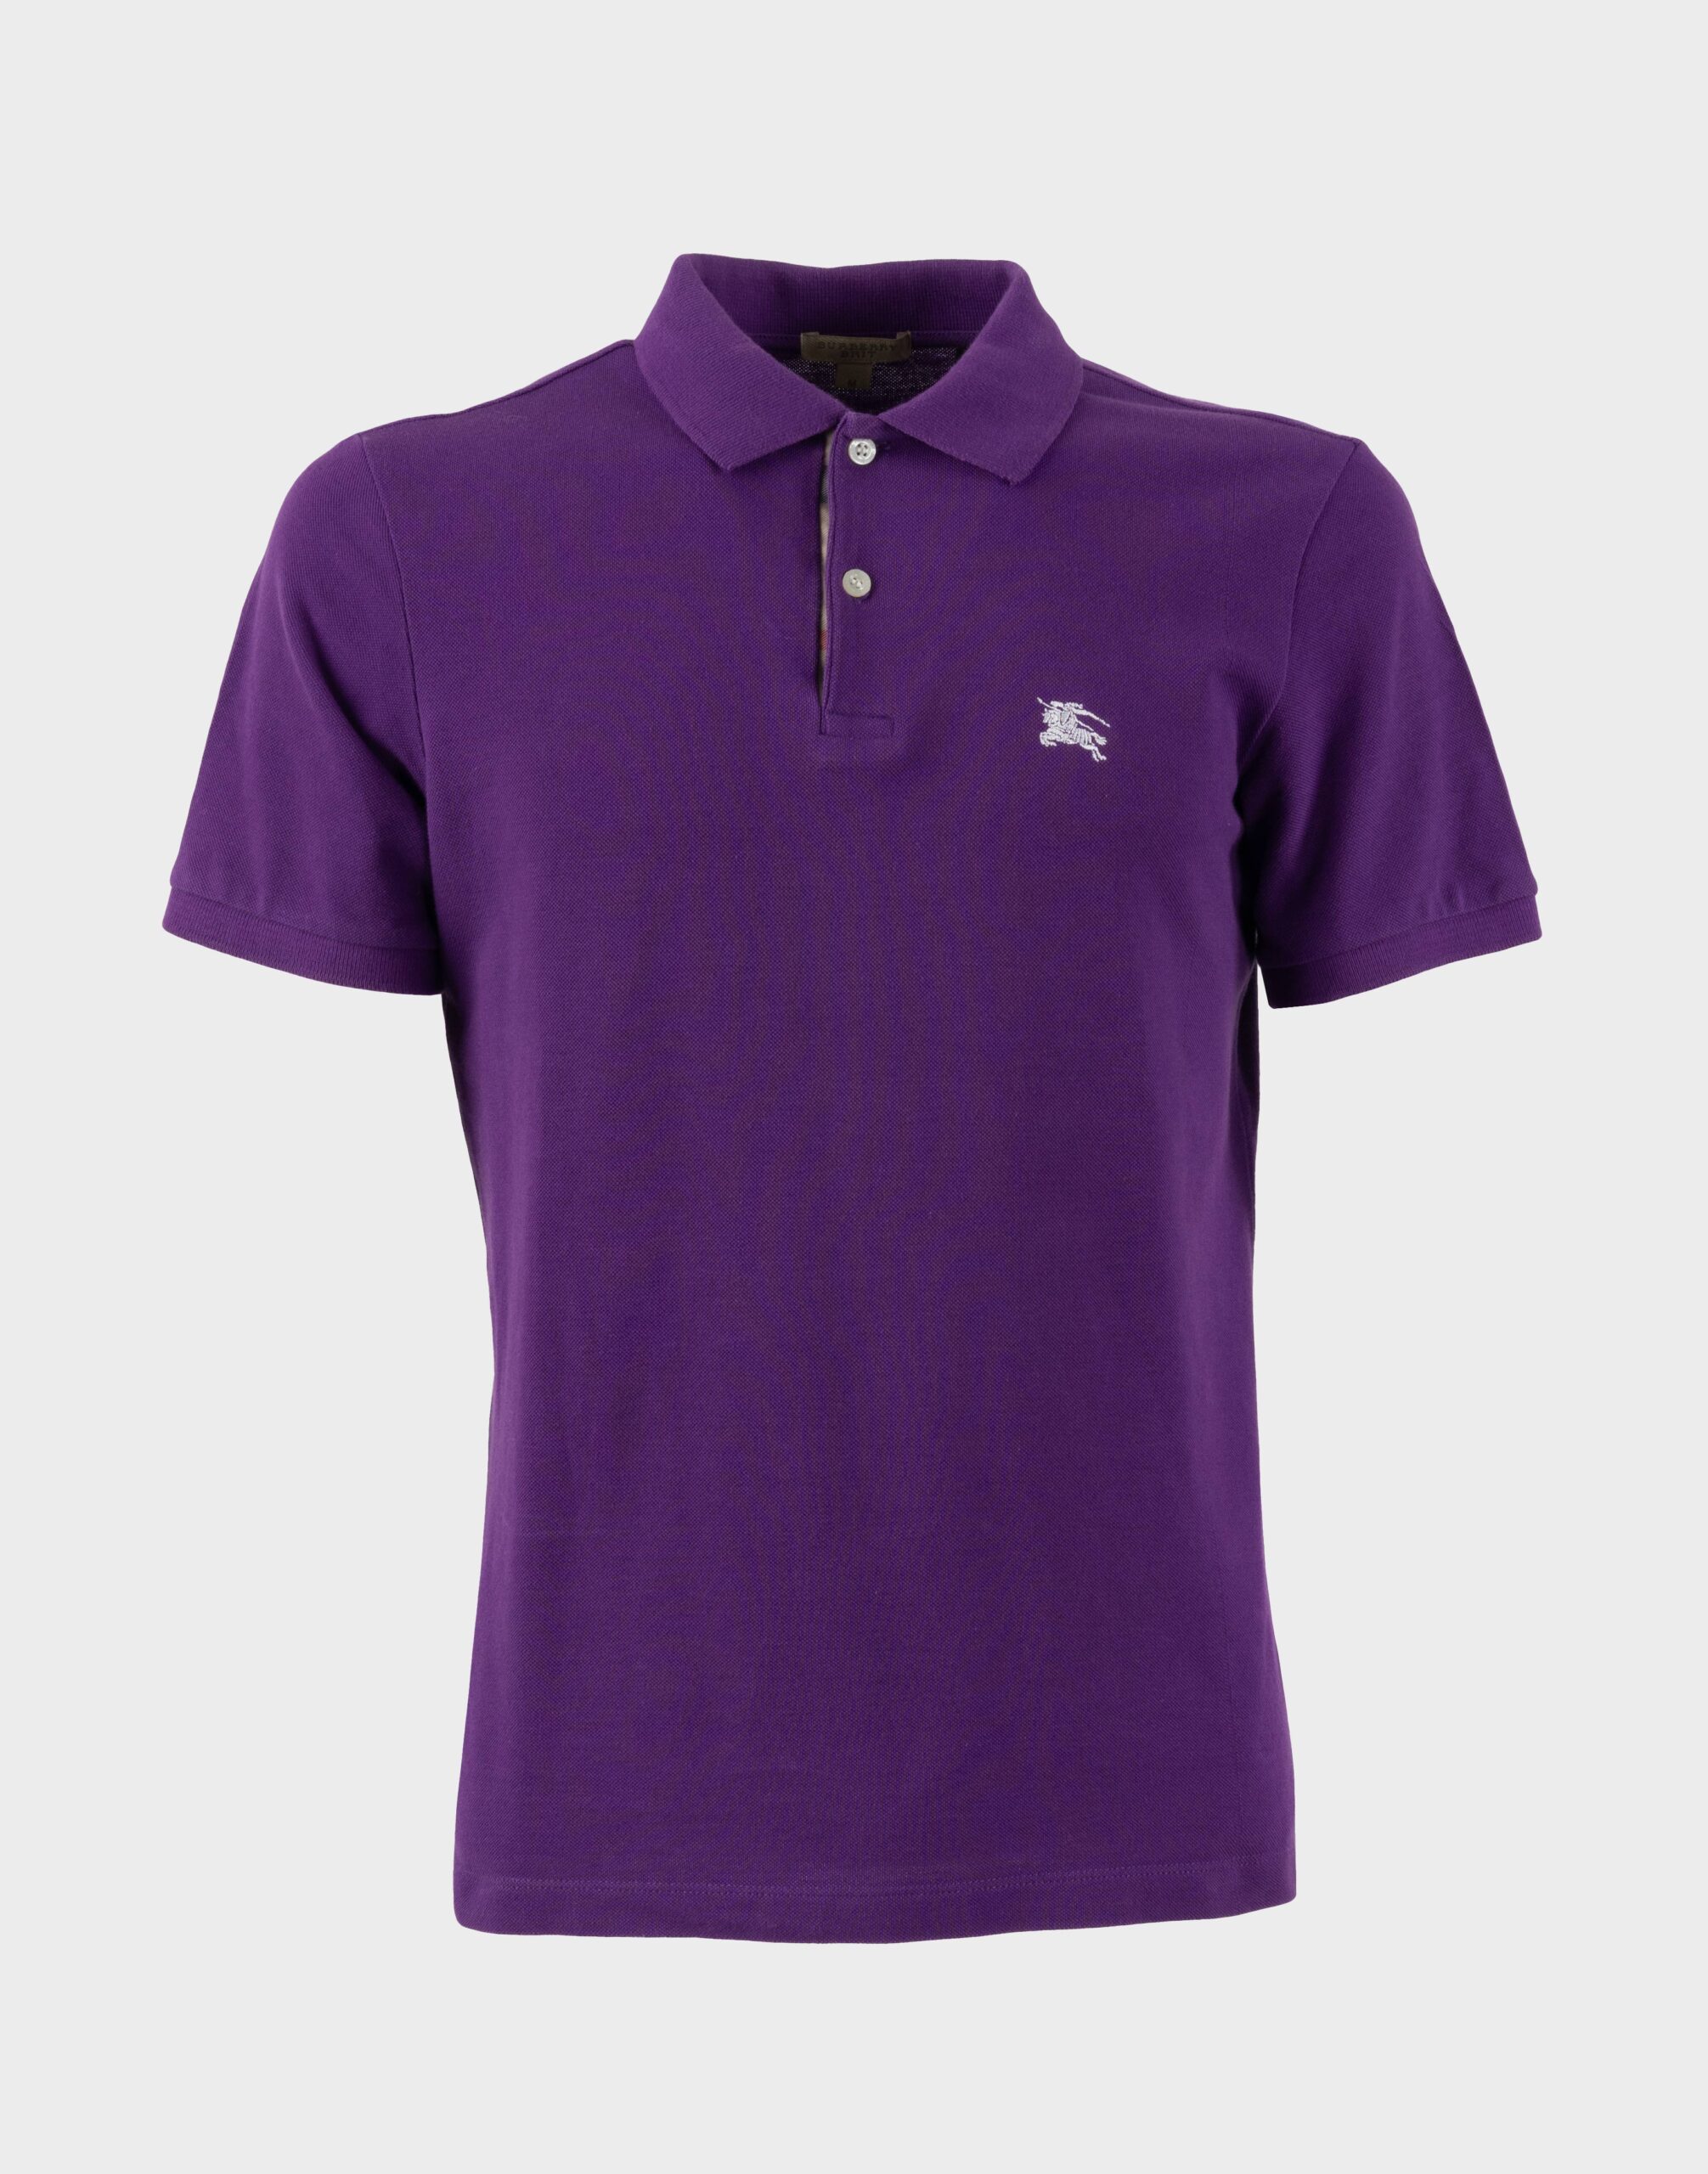 purple men's short-sleeved cotton polo shirt with two buttons on the front and embroidered logo